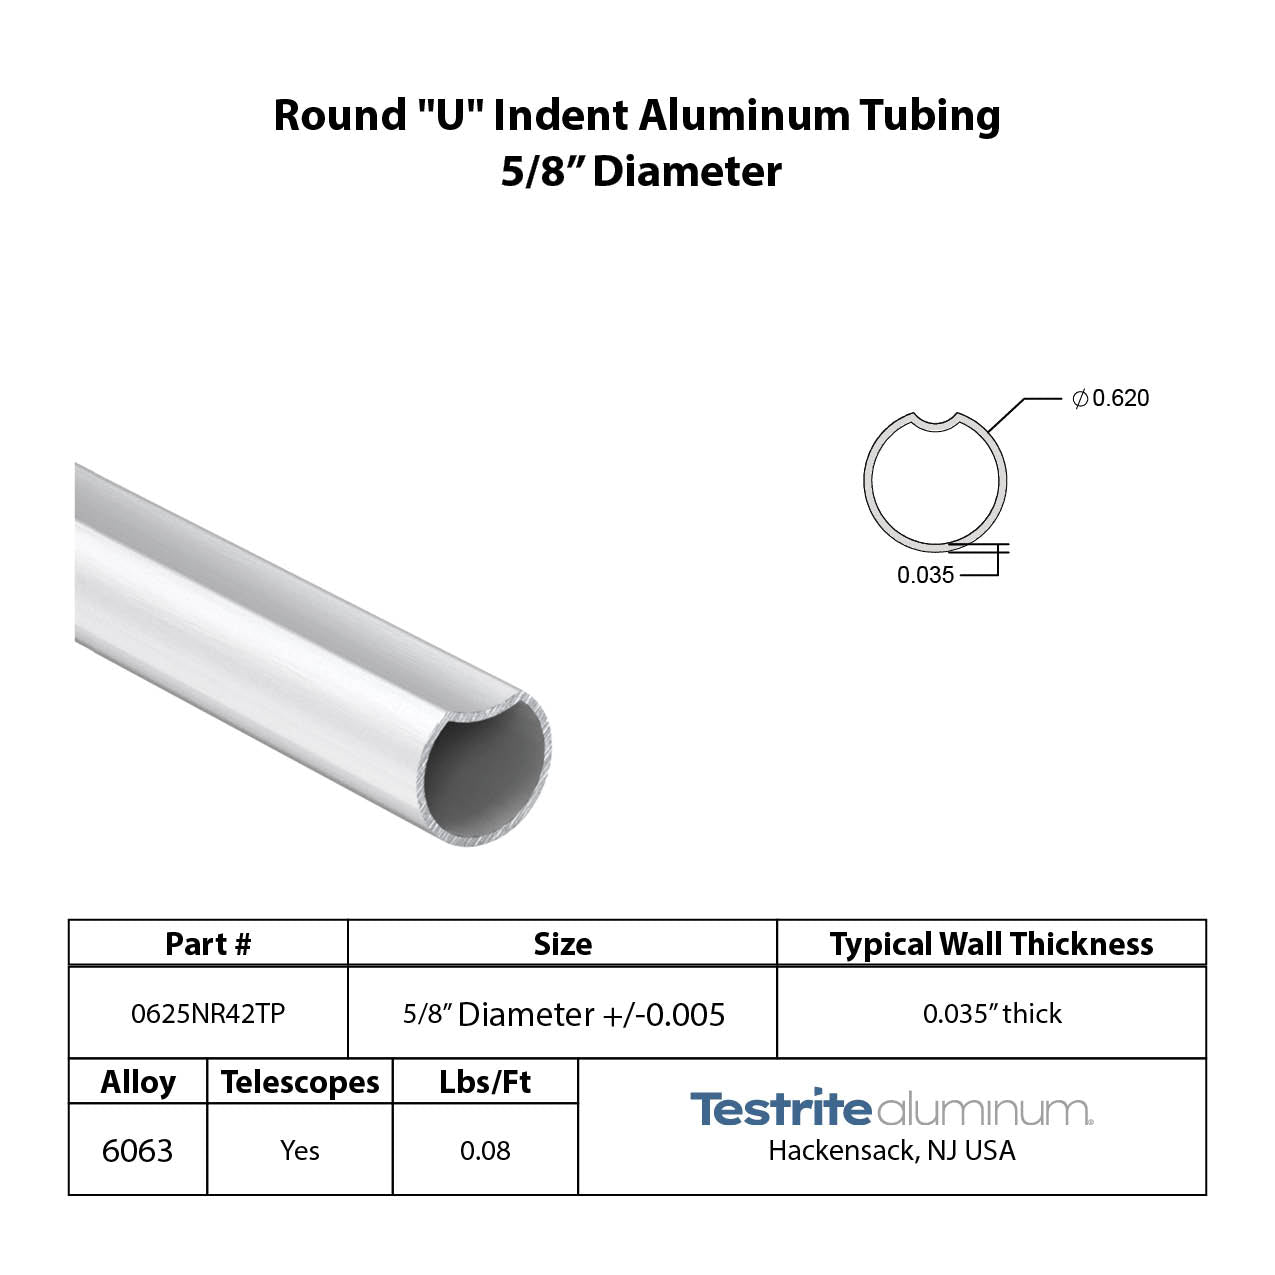 Specification sheet for 5/8" OD round U indent aluminum tube index key aluminum tubing .625 in diameter spec sheet thin wall 0625NR42TP